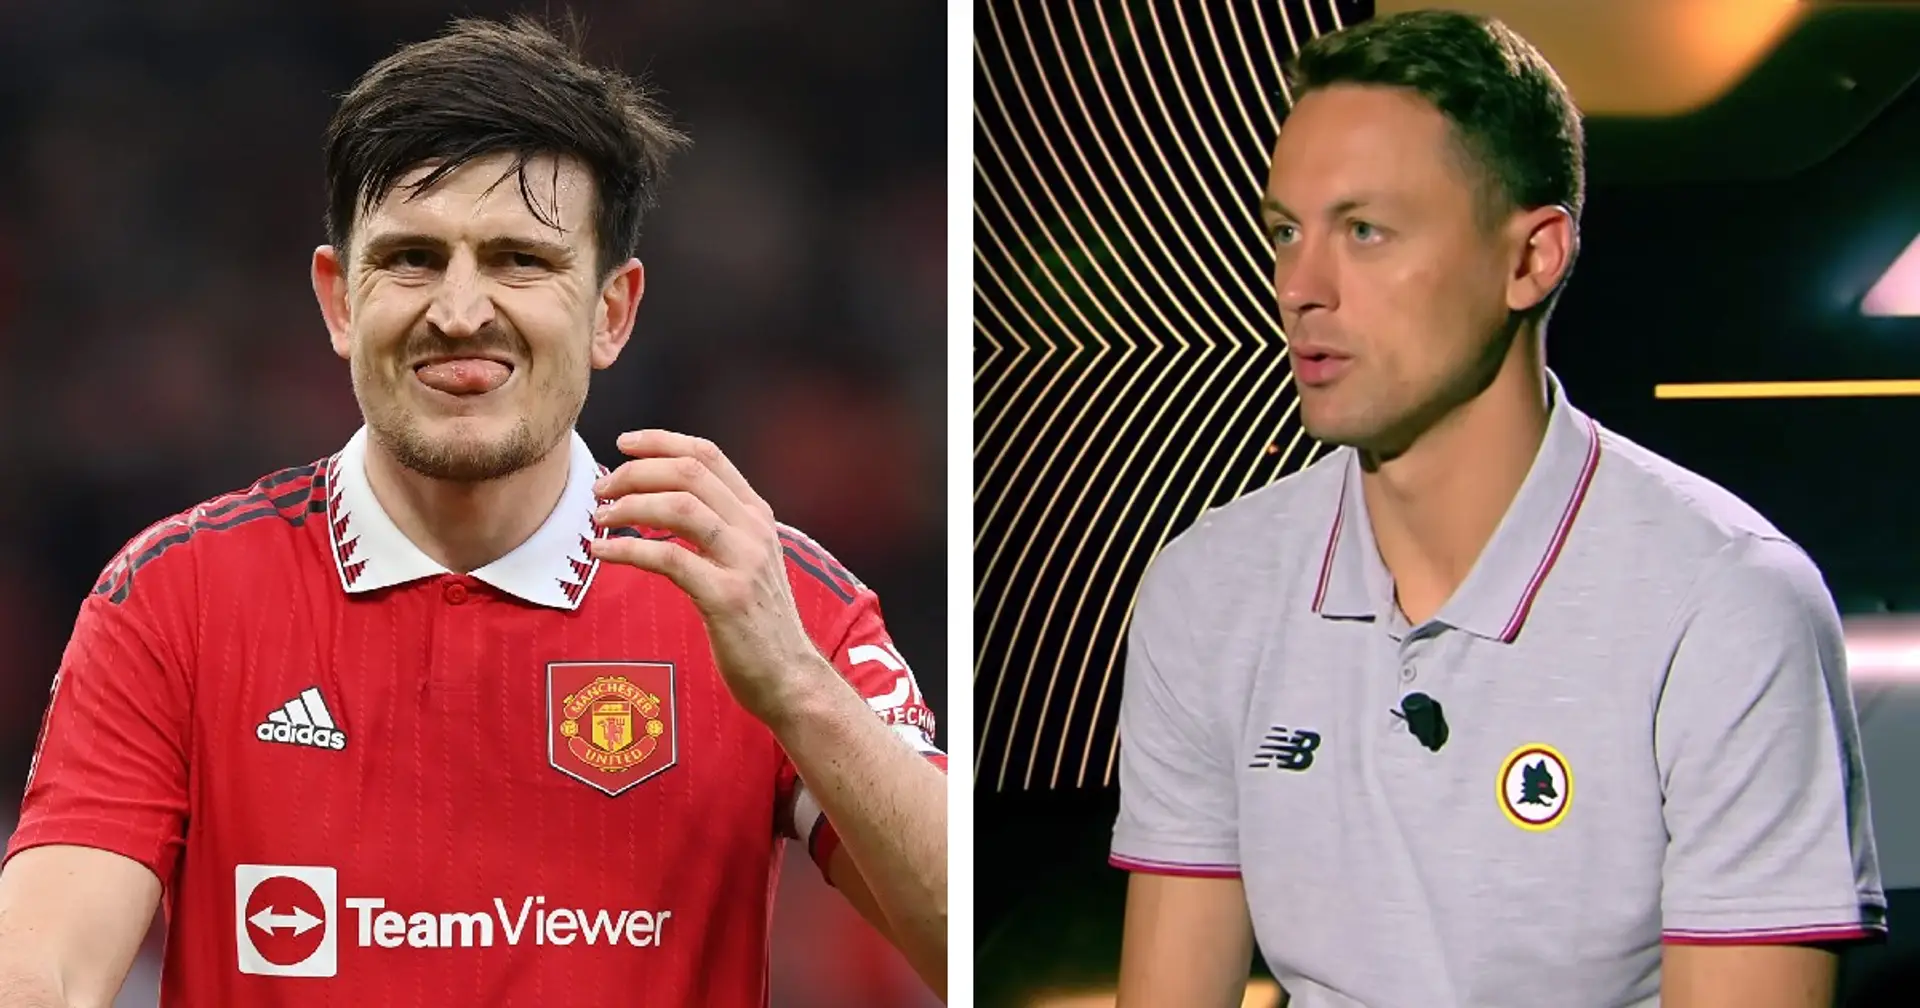 'His situation doesn't look great': Matic on Maguire's future at Man United